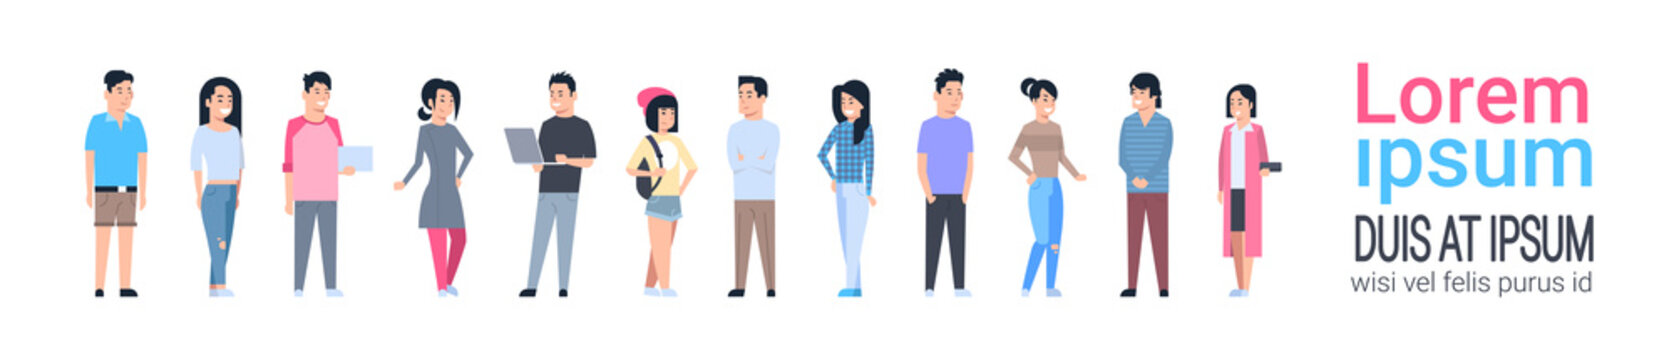 Young Asian Men And Women Icons Set Chinese Or Japanese Male And Female Full Length Isolated Vector Illustration